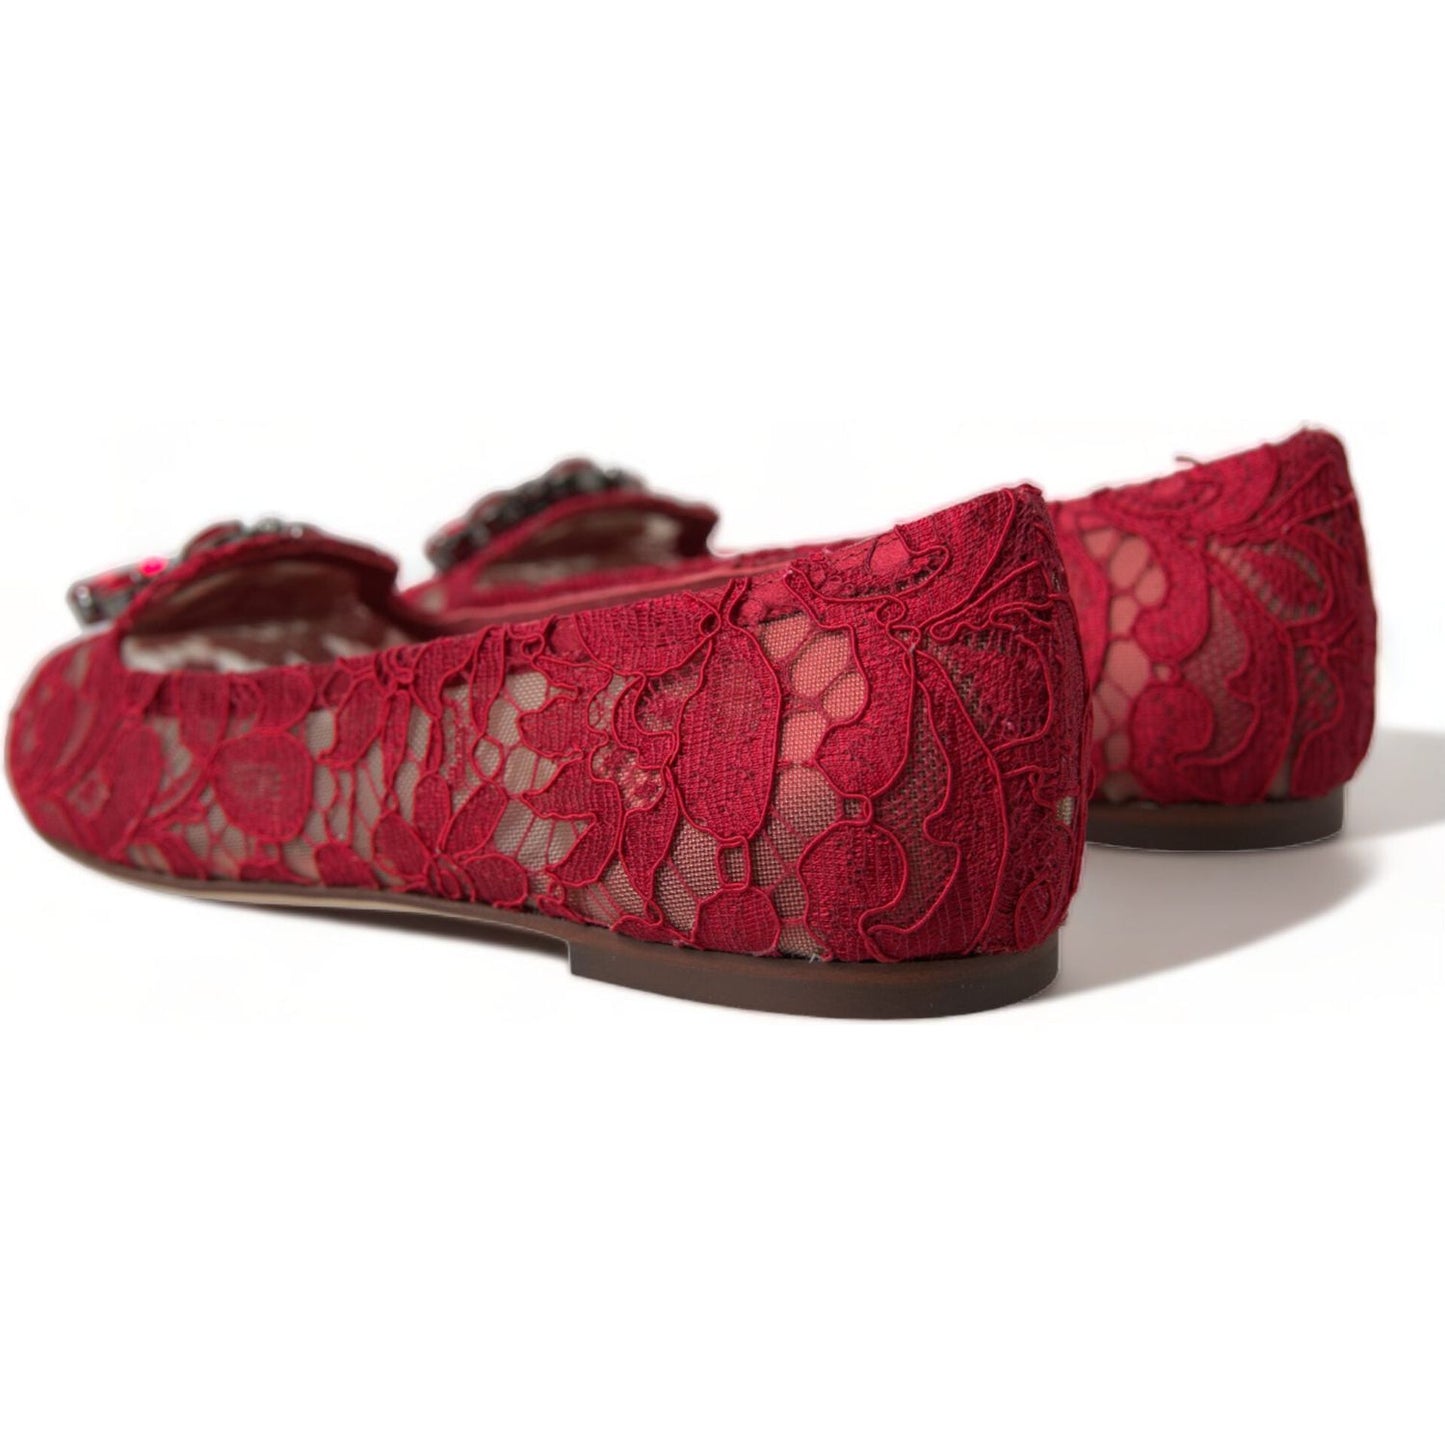 Dolce & Gabbana Elegant Floral Lace Vally Flats red-vally-taormina-lace-crystals-flats-shoes